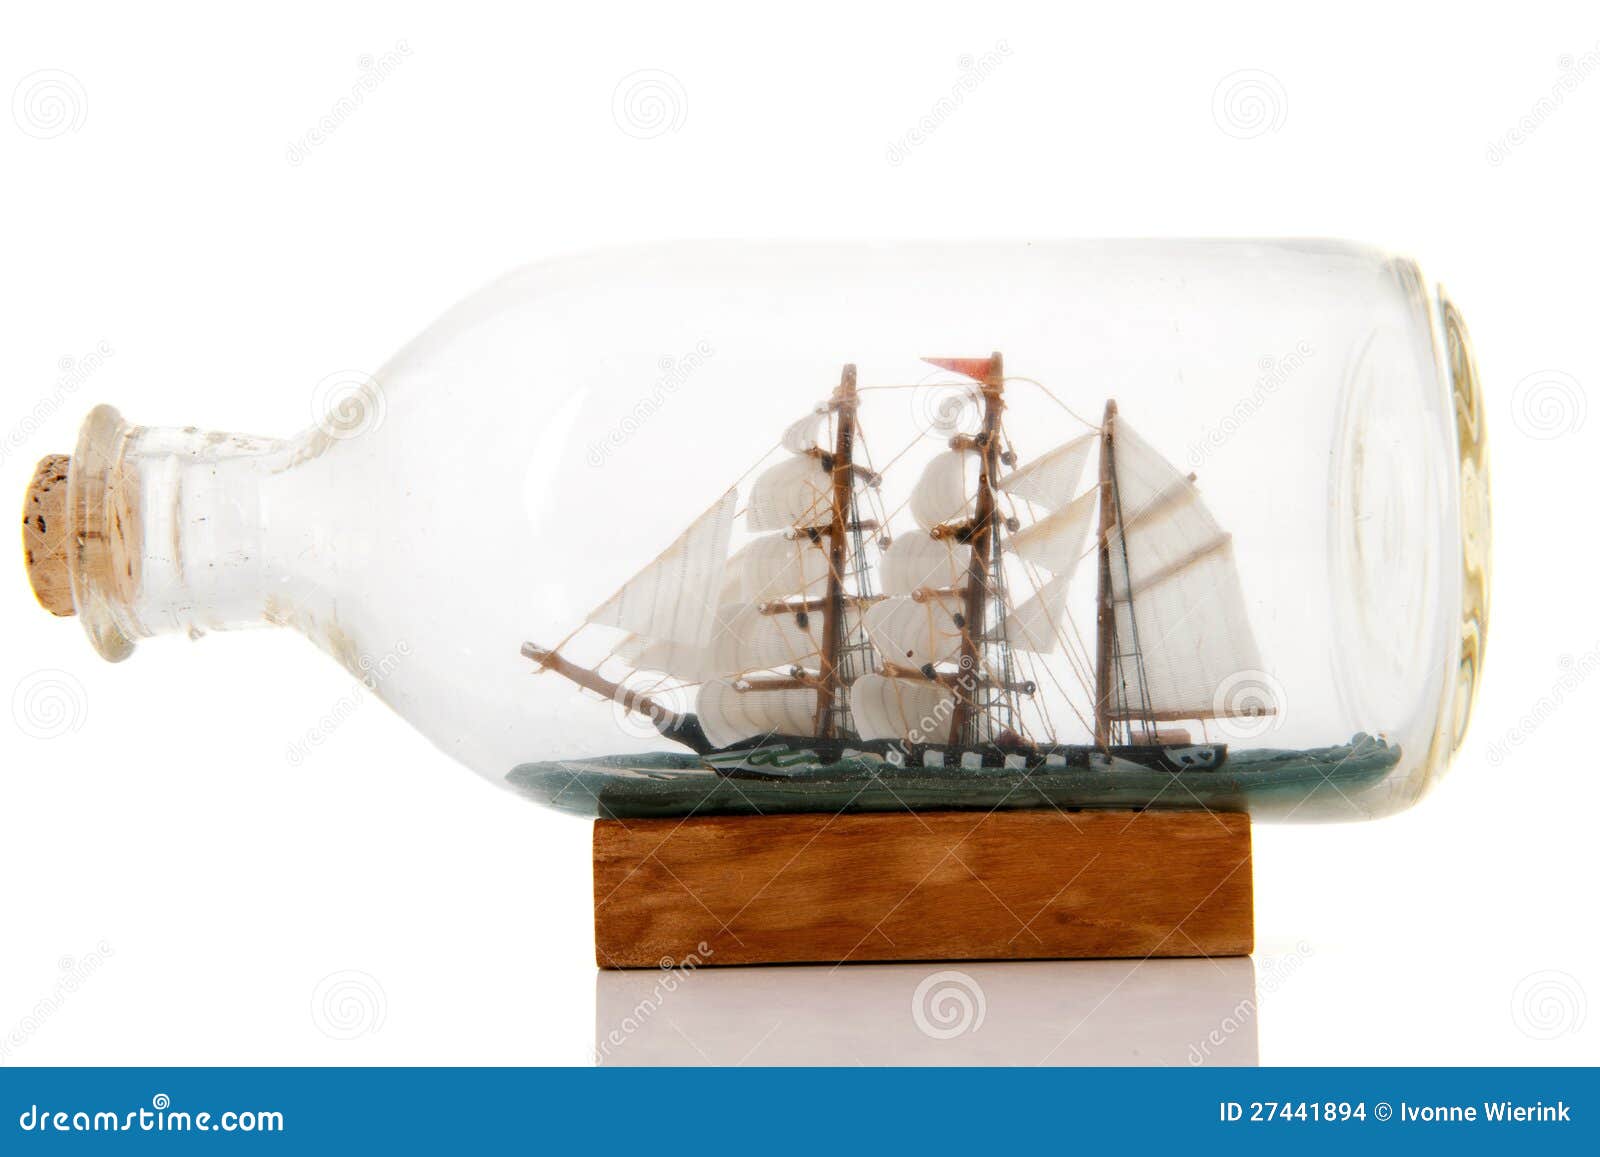 Old Boat In Bottle Stock Images - Image: 27441894